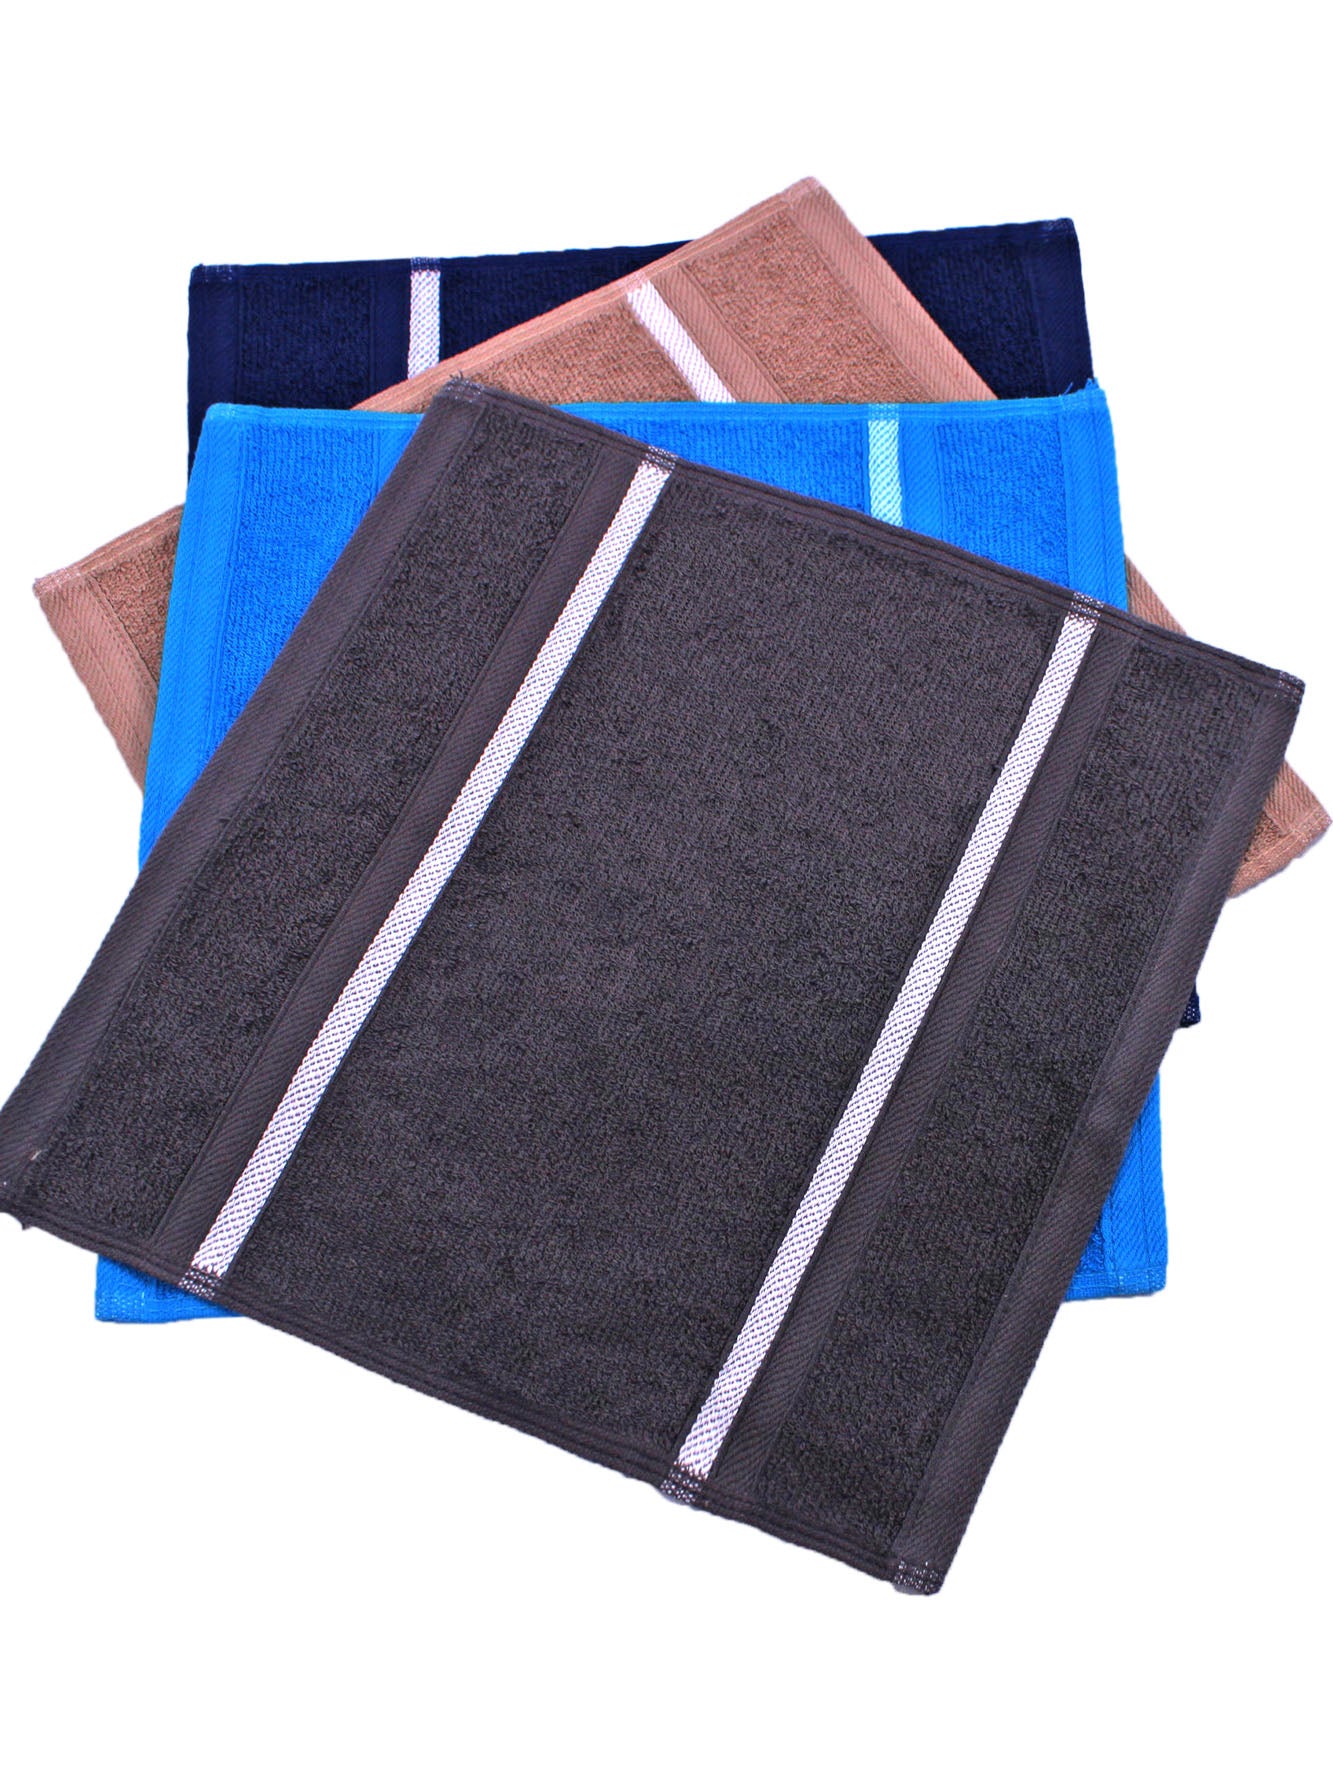 Hydro Stripe Towels Home and beyond